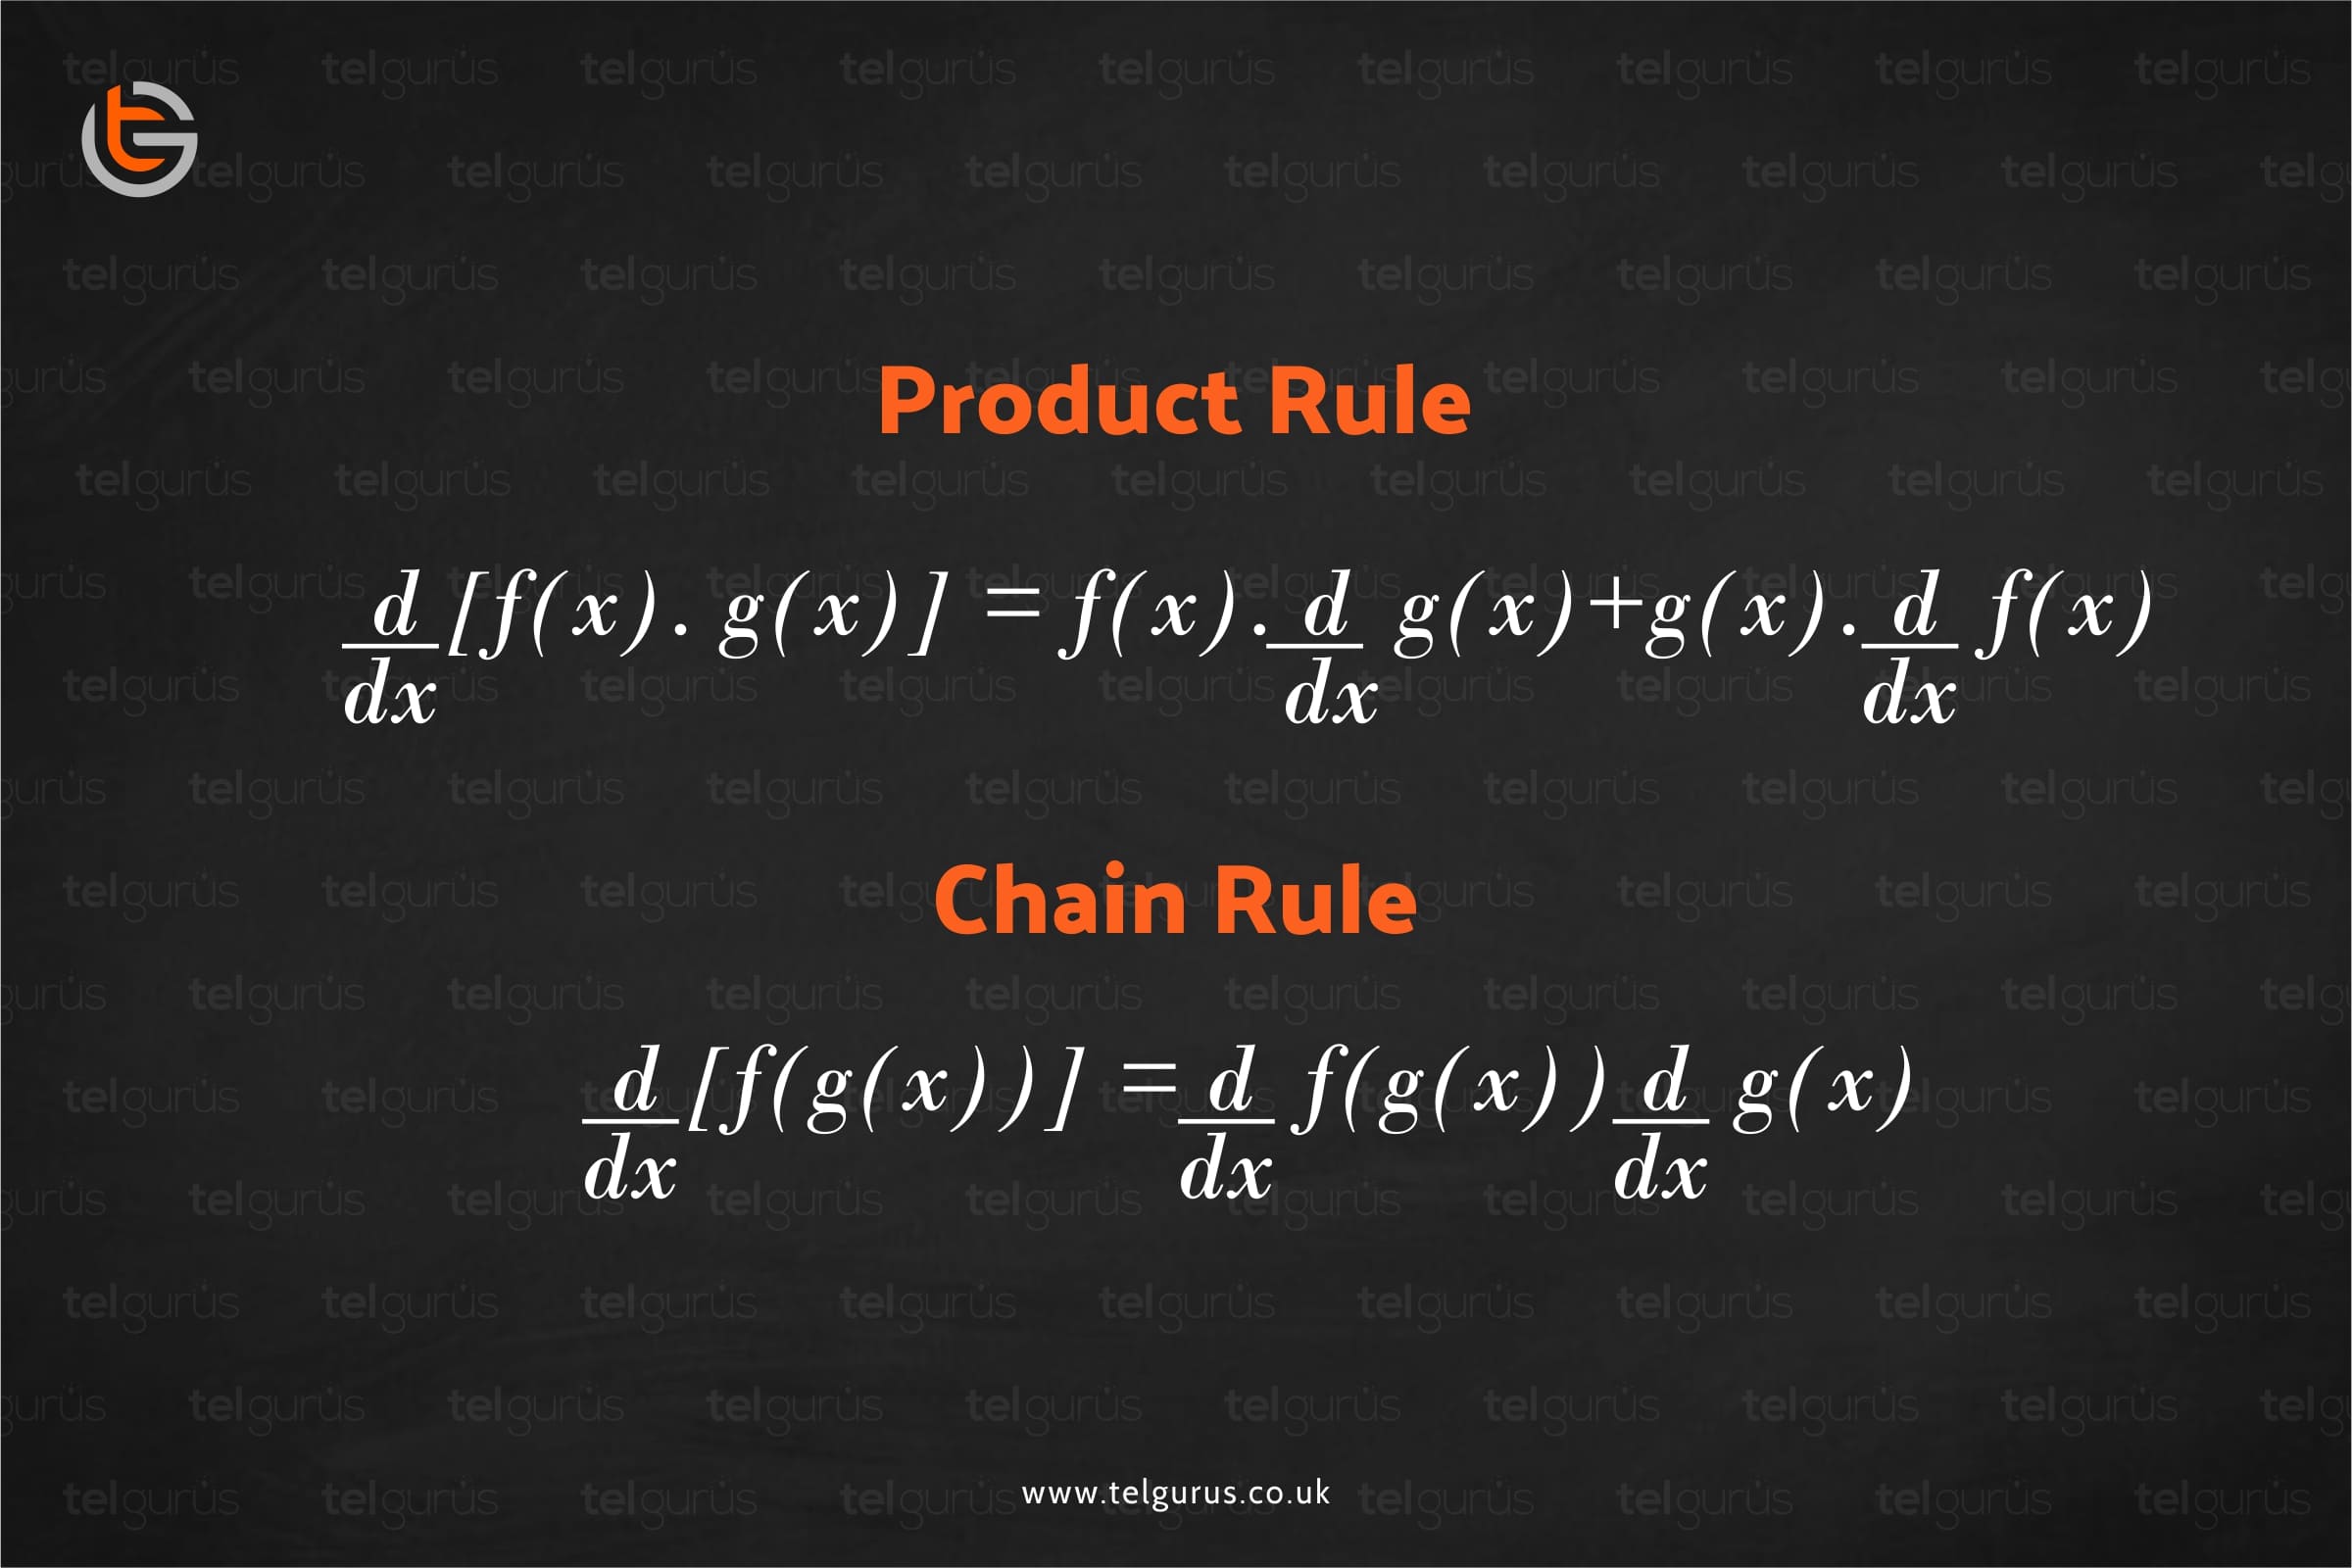 When do I use the chain rule and when do I use the product rule in differentiation?